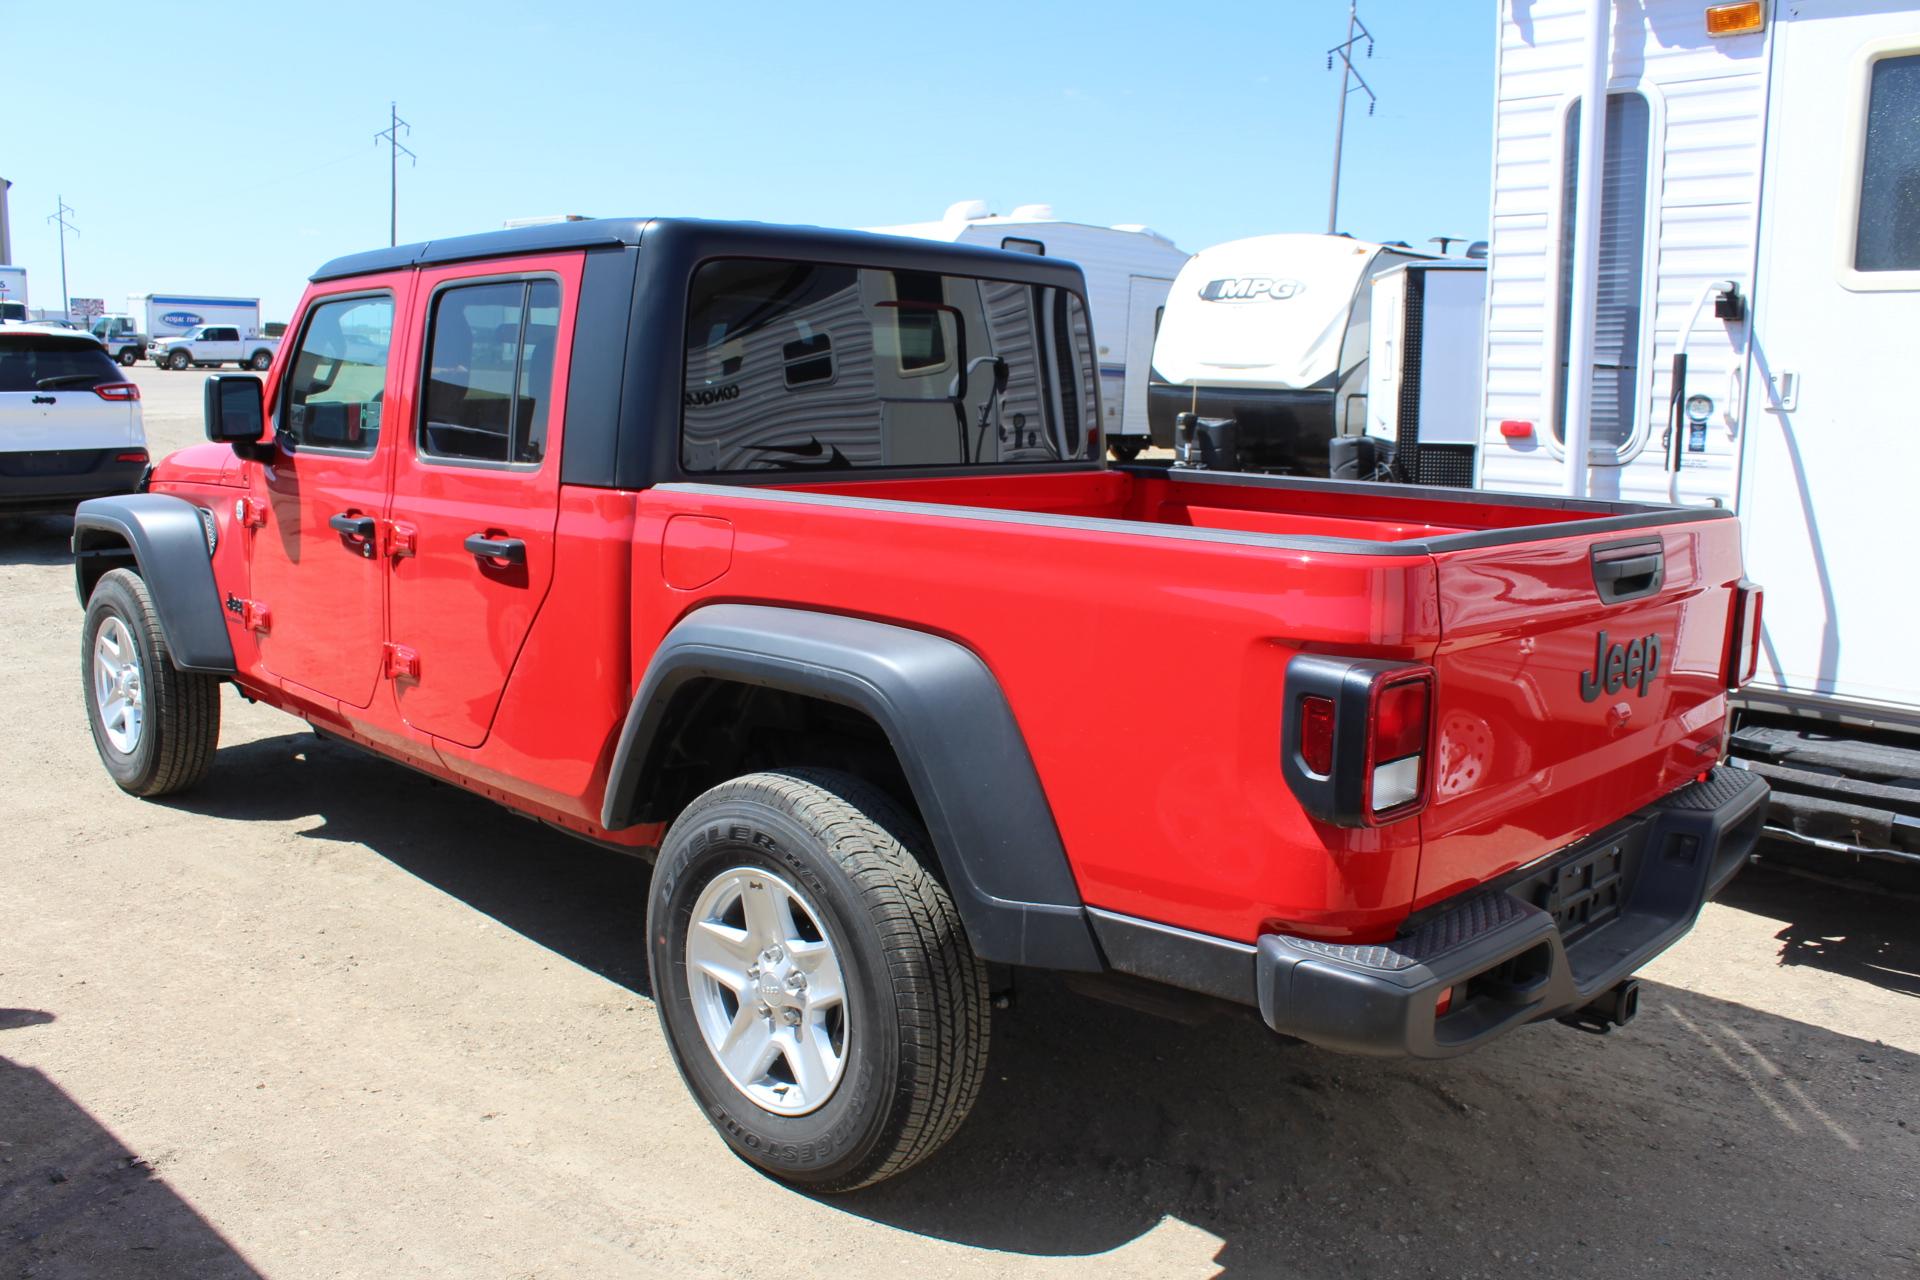 2020 Jeep Gladiator Sport 4x4, Trail Rated, Package 24S, Firecracker Red,